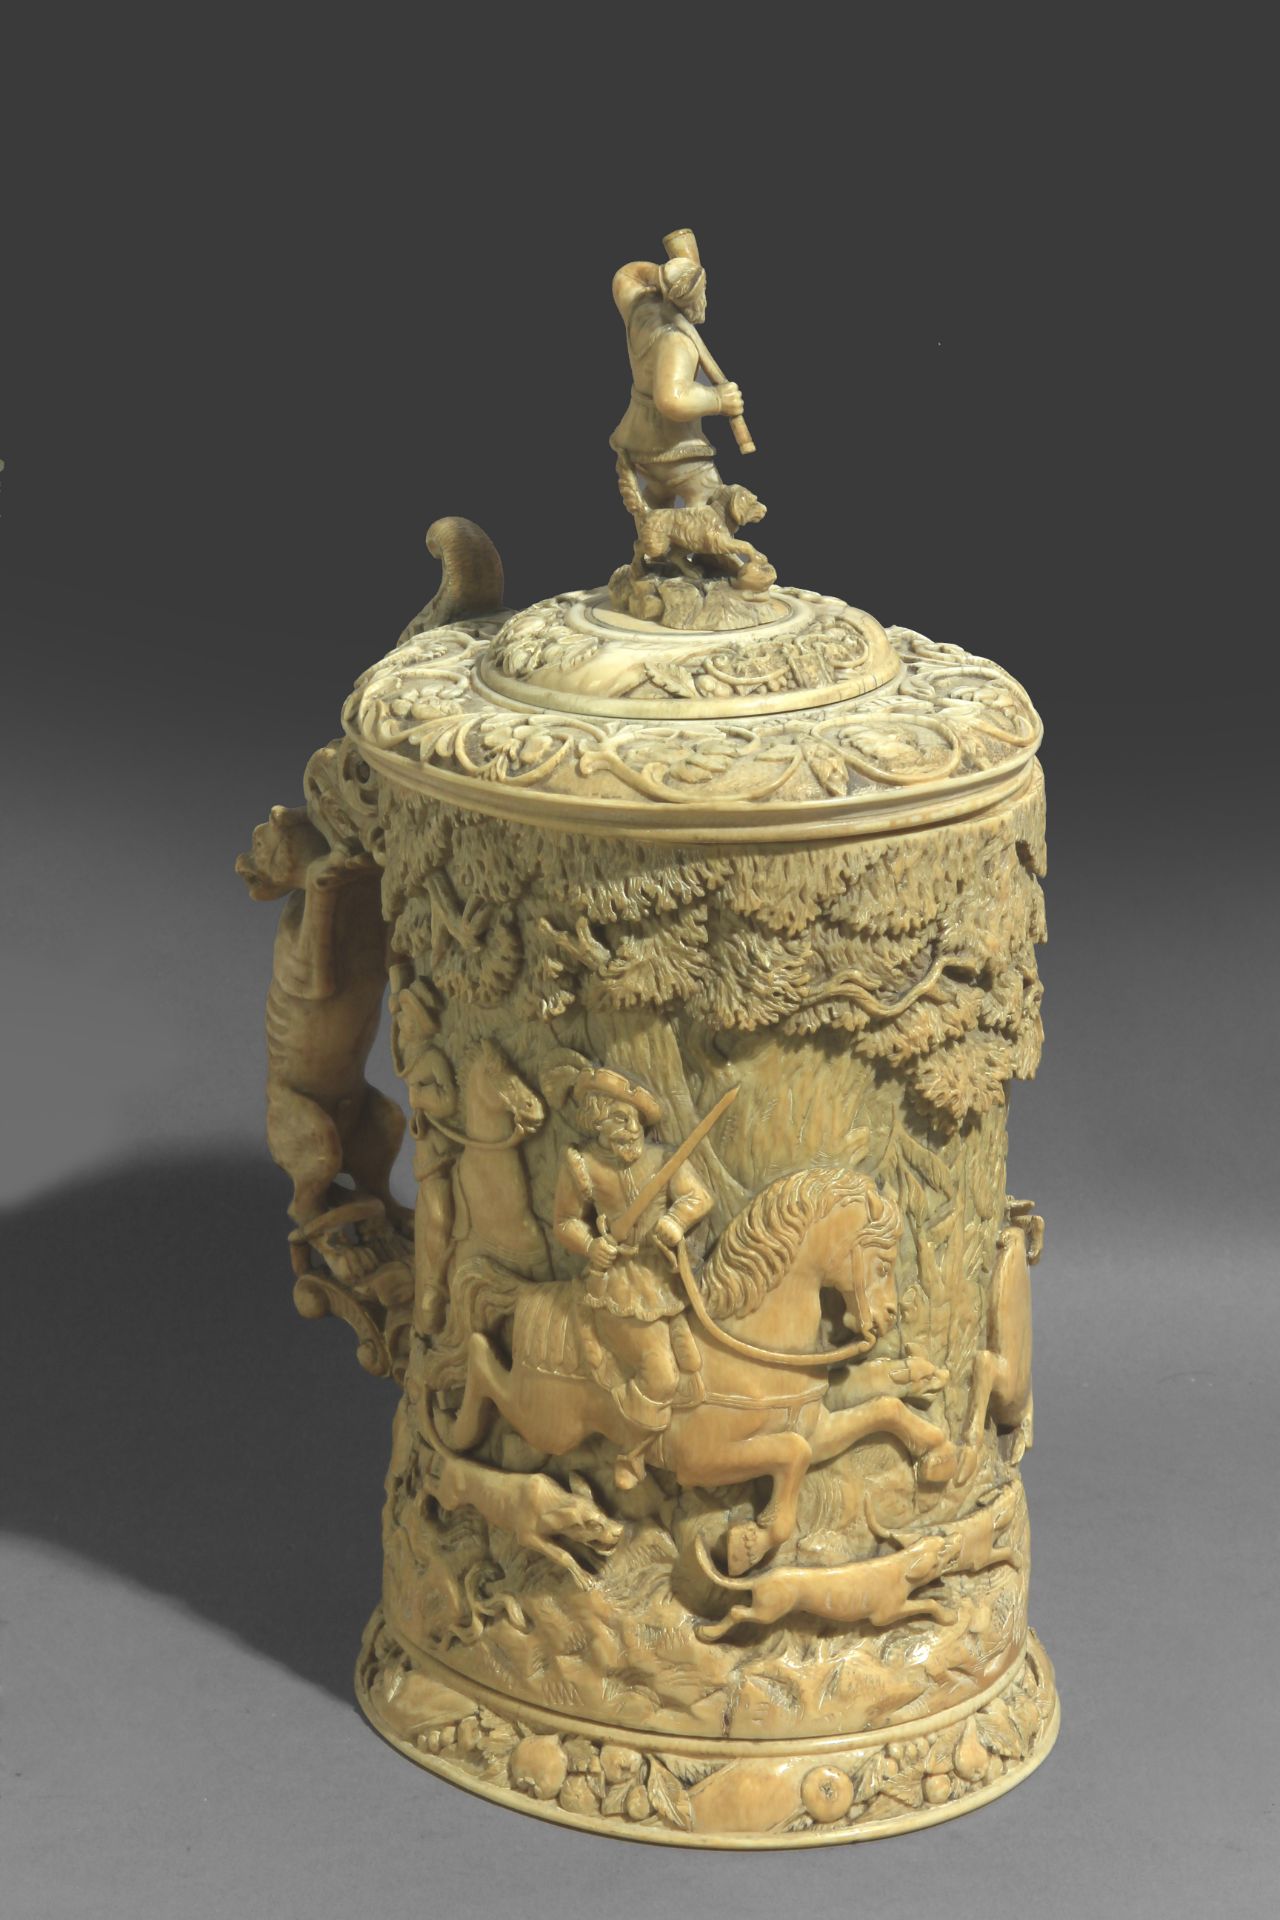 Early 18th century possibly German tankard - Image 9 of 14